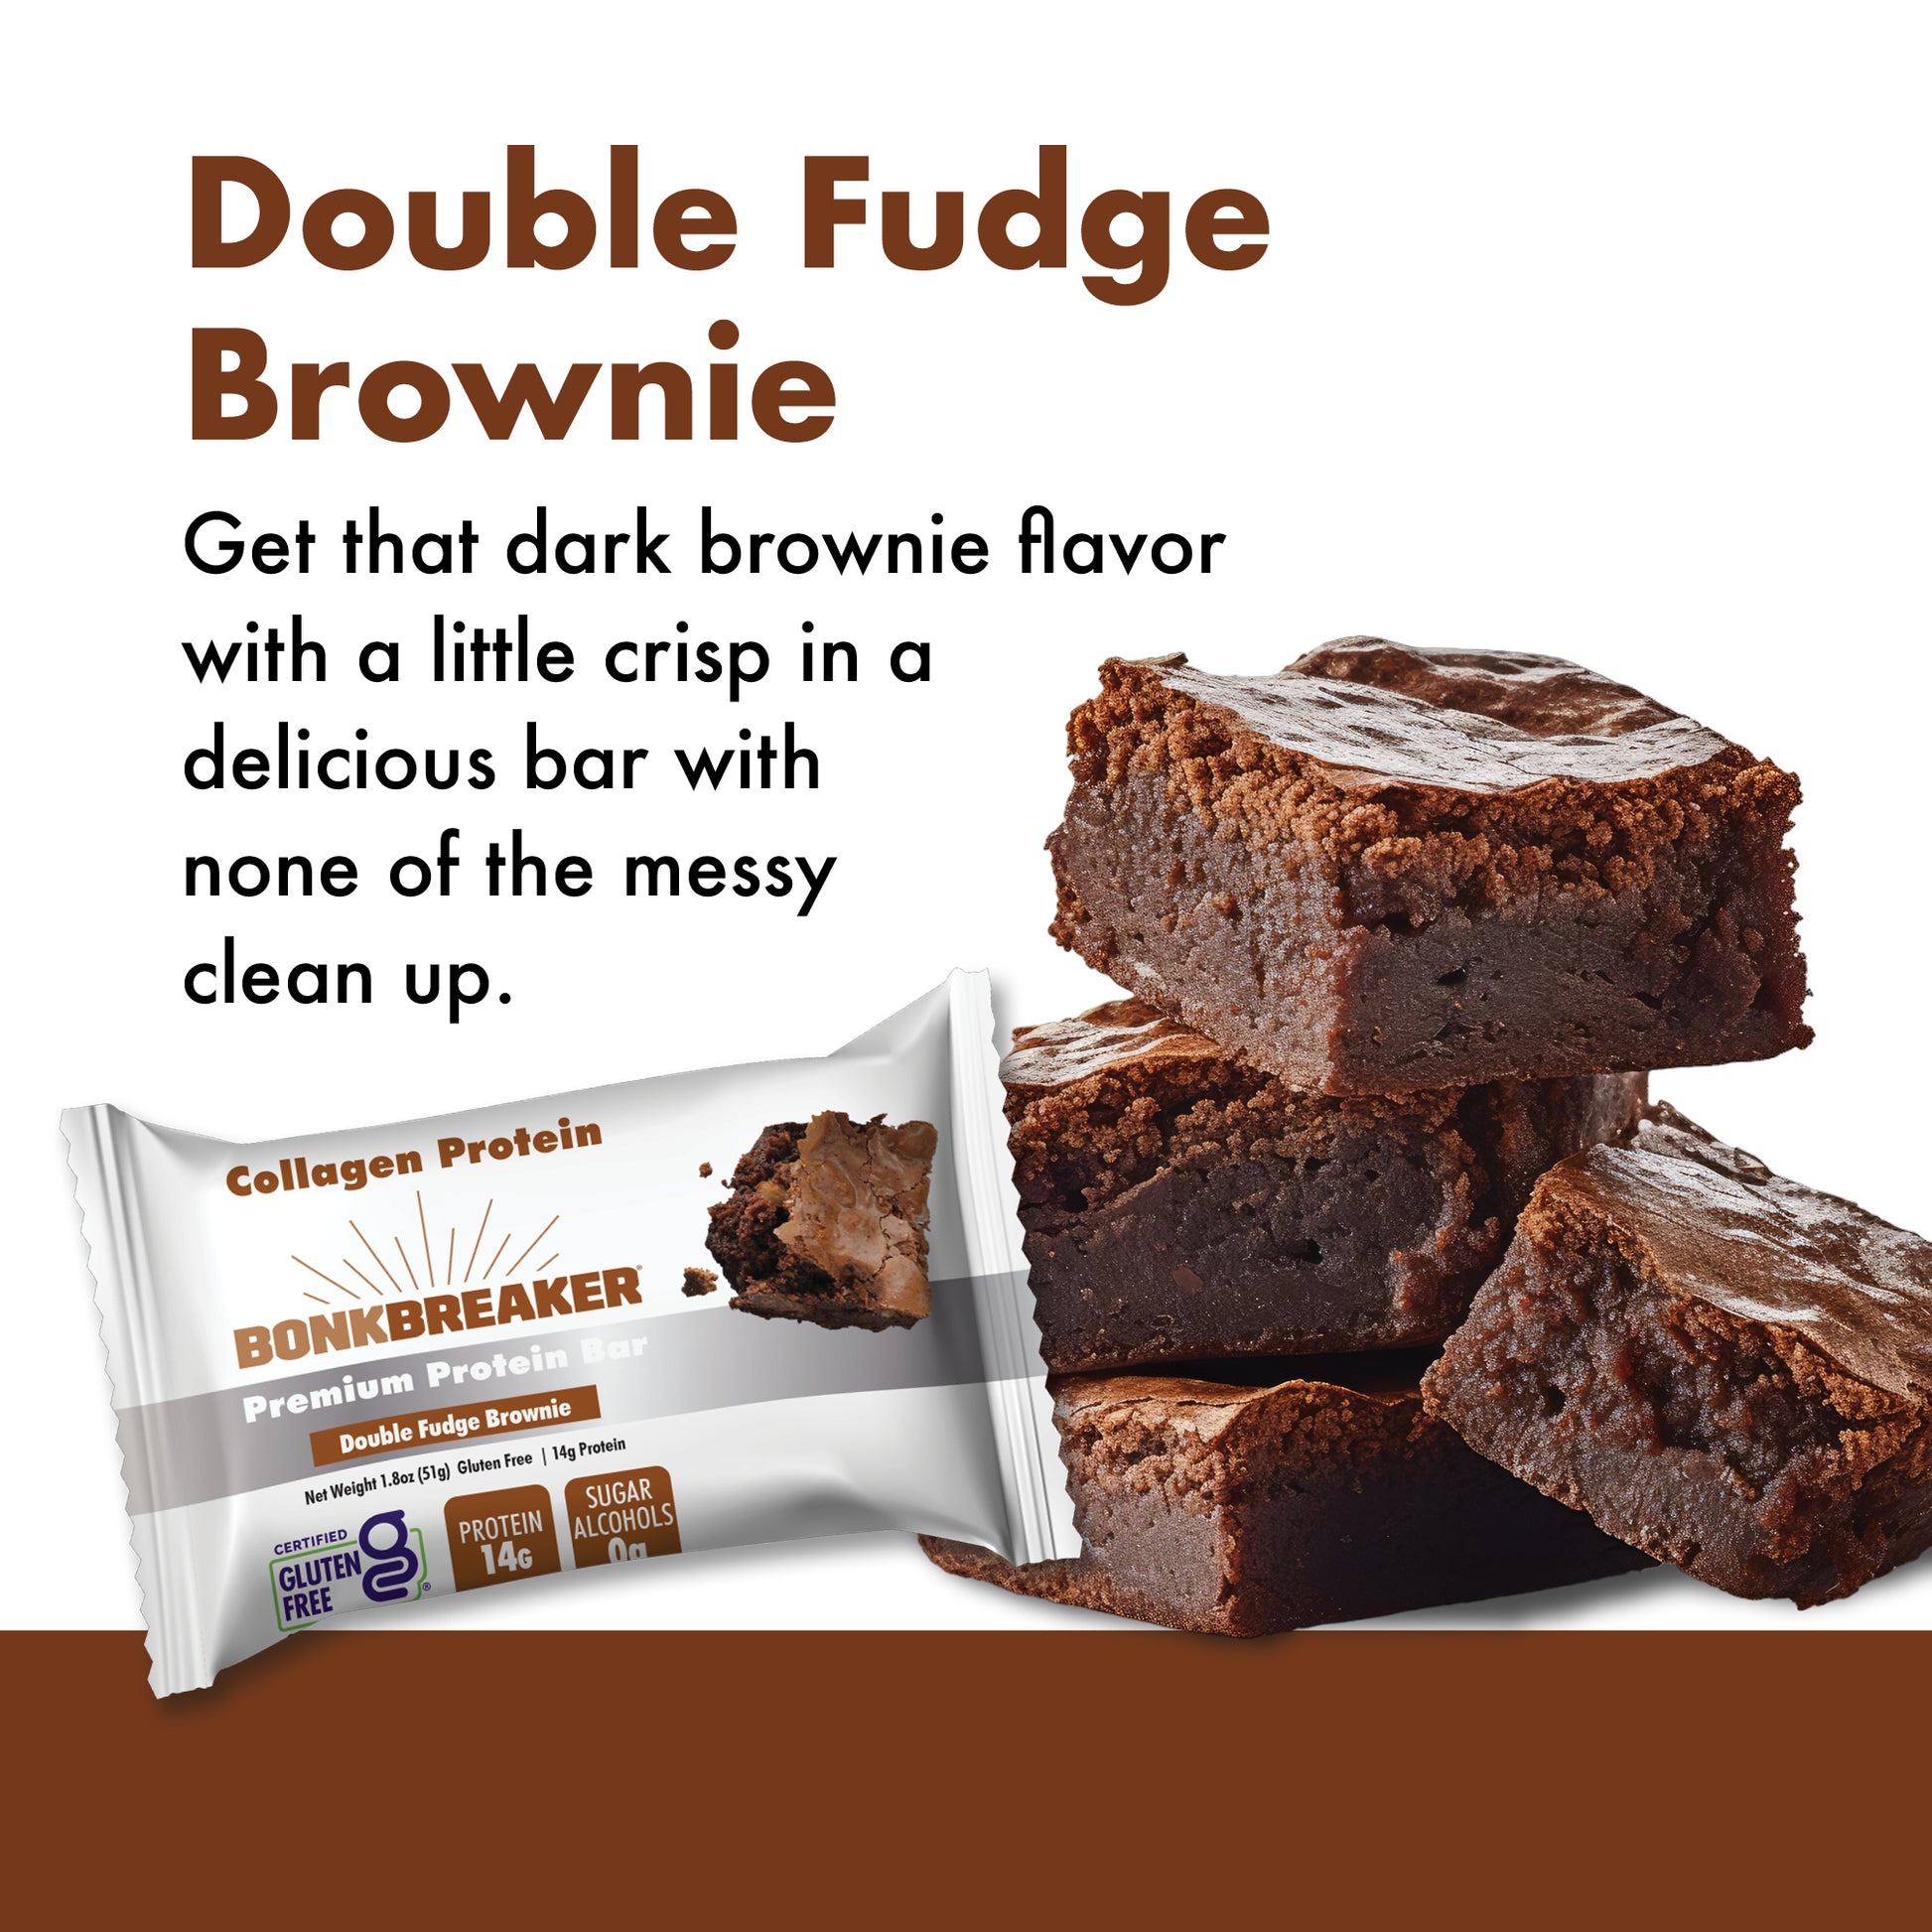 Double Fudge Brownie - Get that dark brownie flavor with a little crisp in a delicious bar with none of the messy clean up.